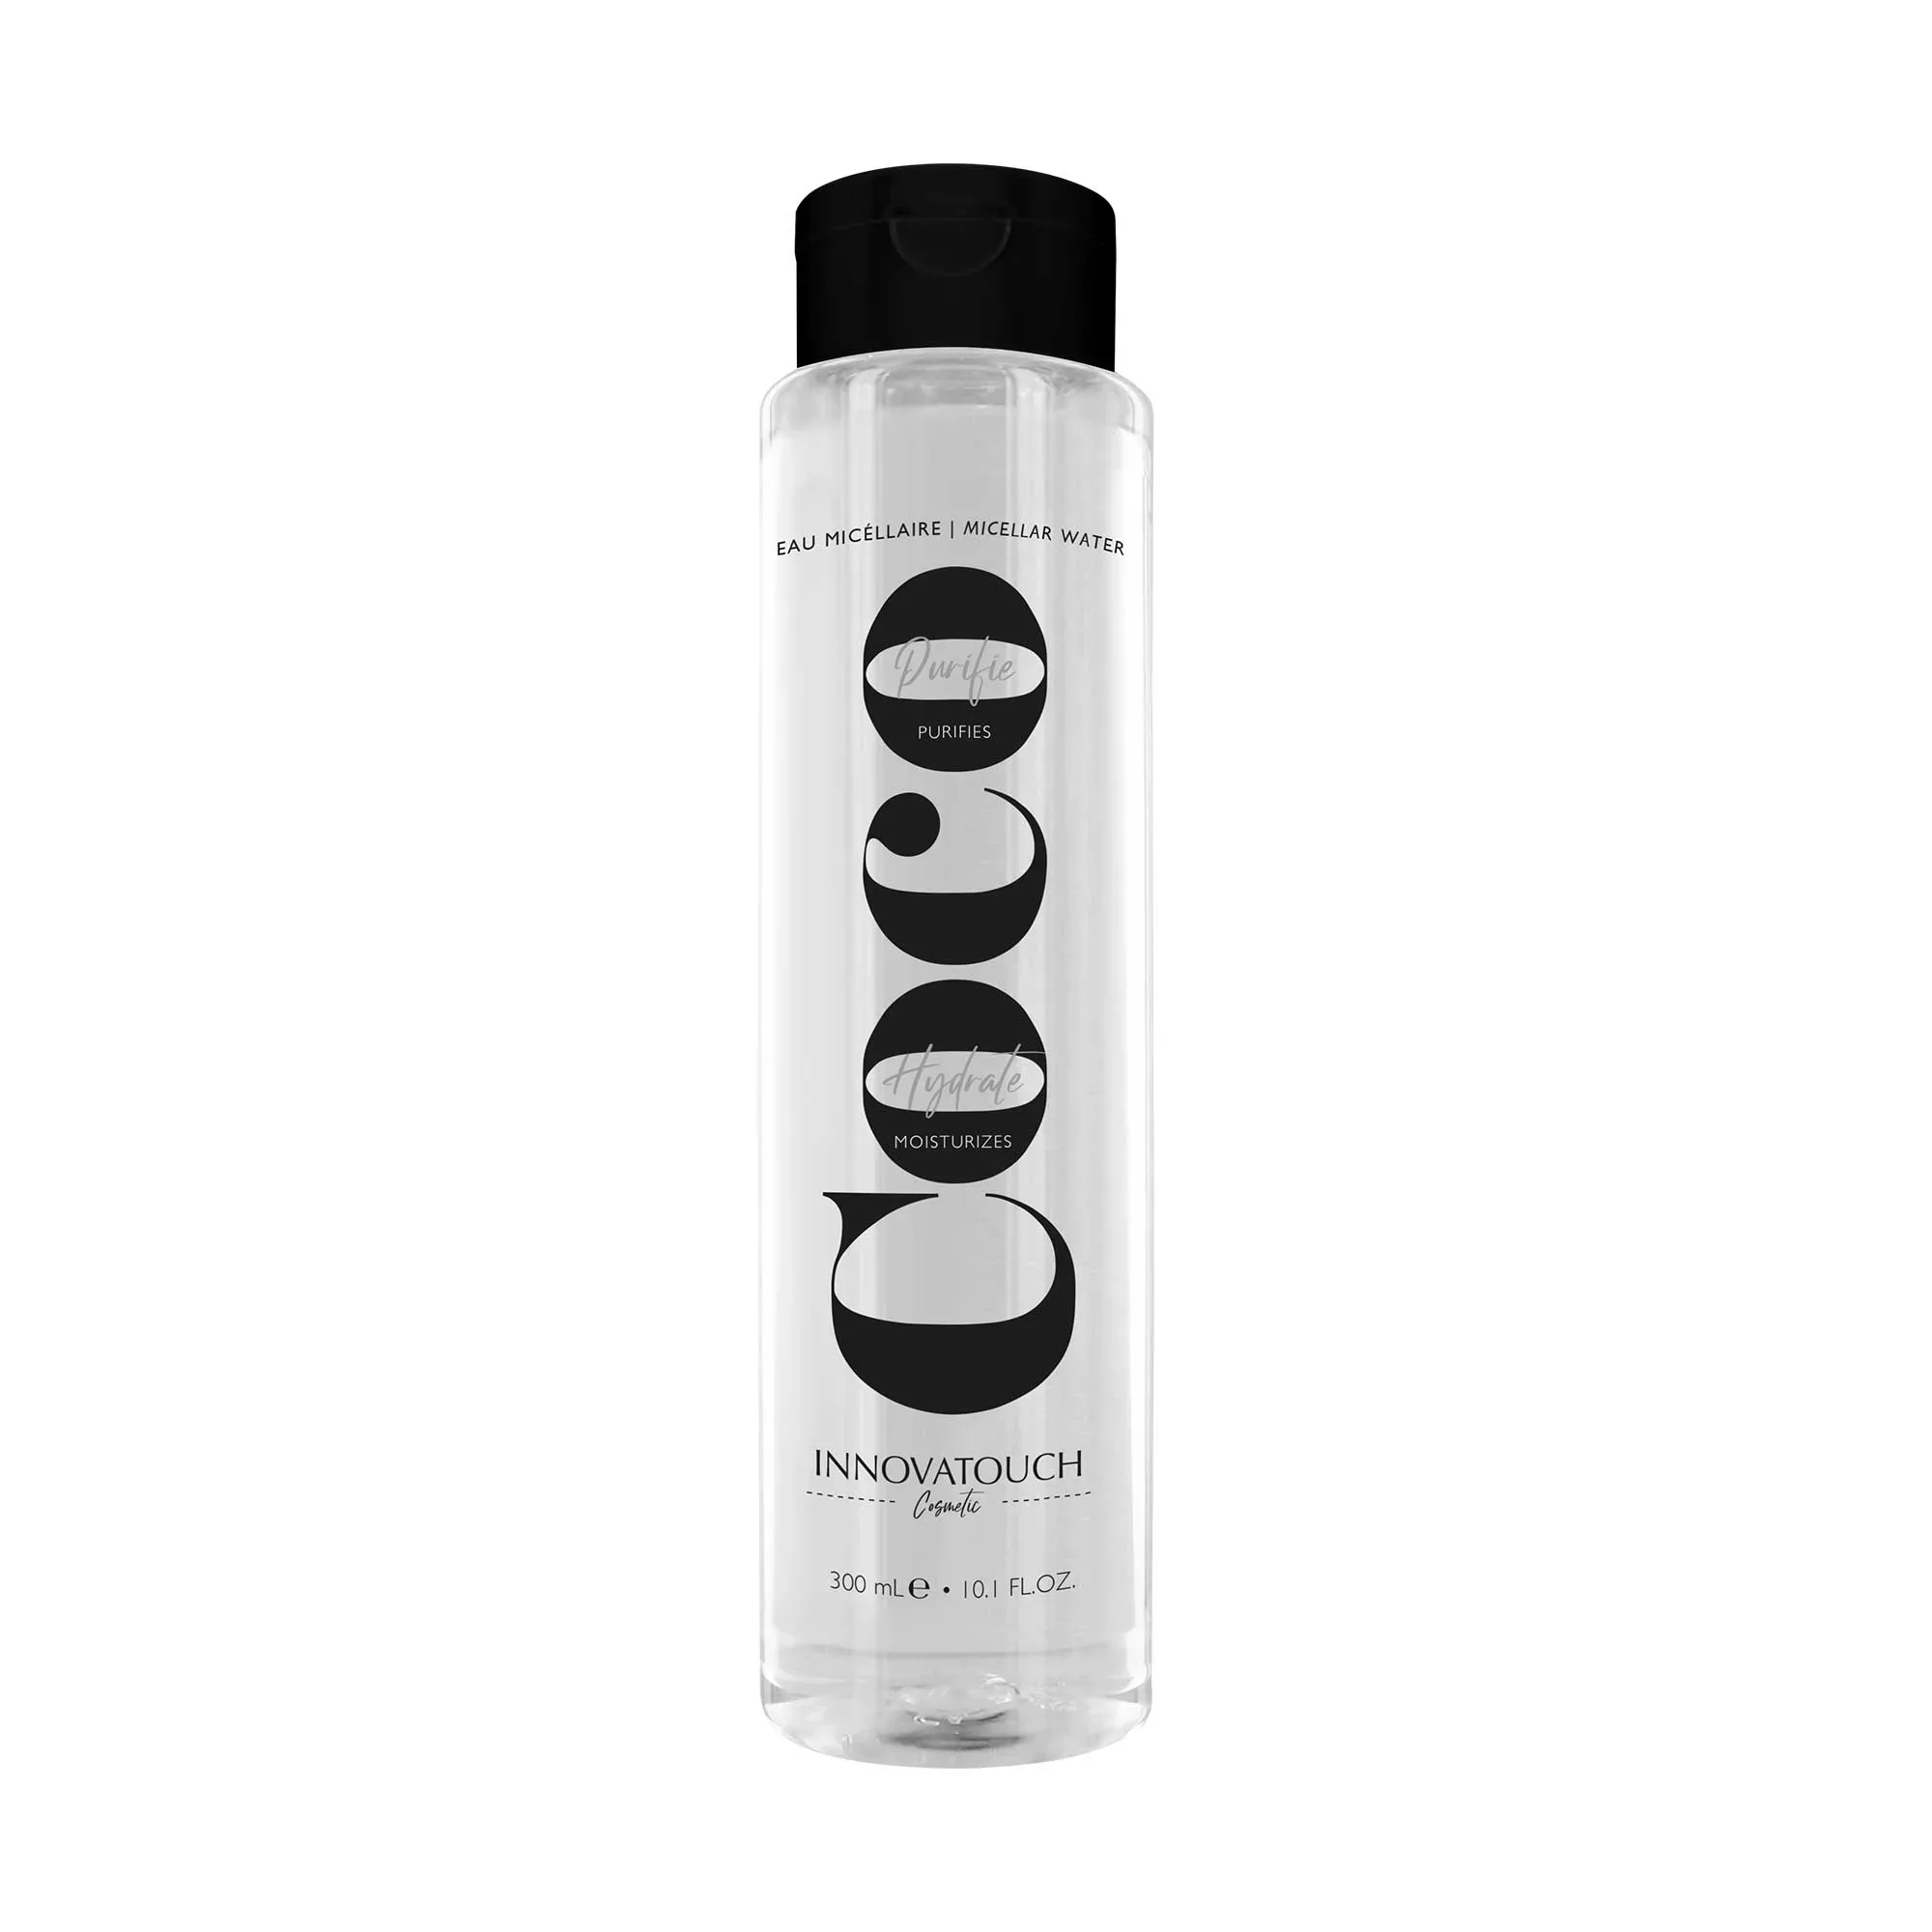 Eau micellaire coco innovatouch cosmetic 200ml